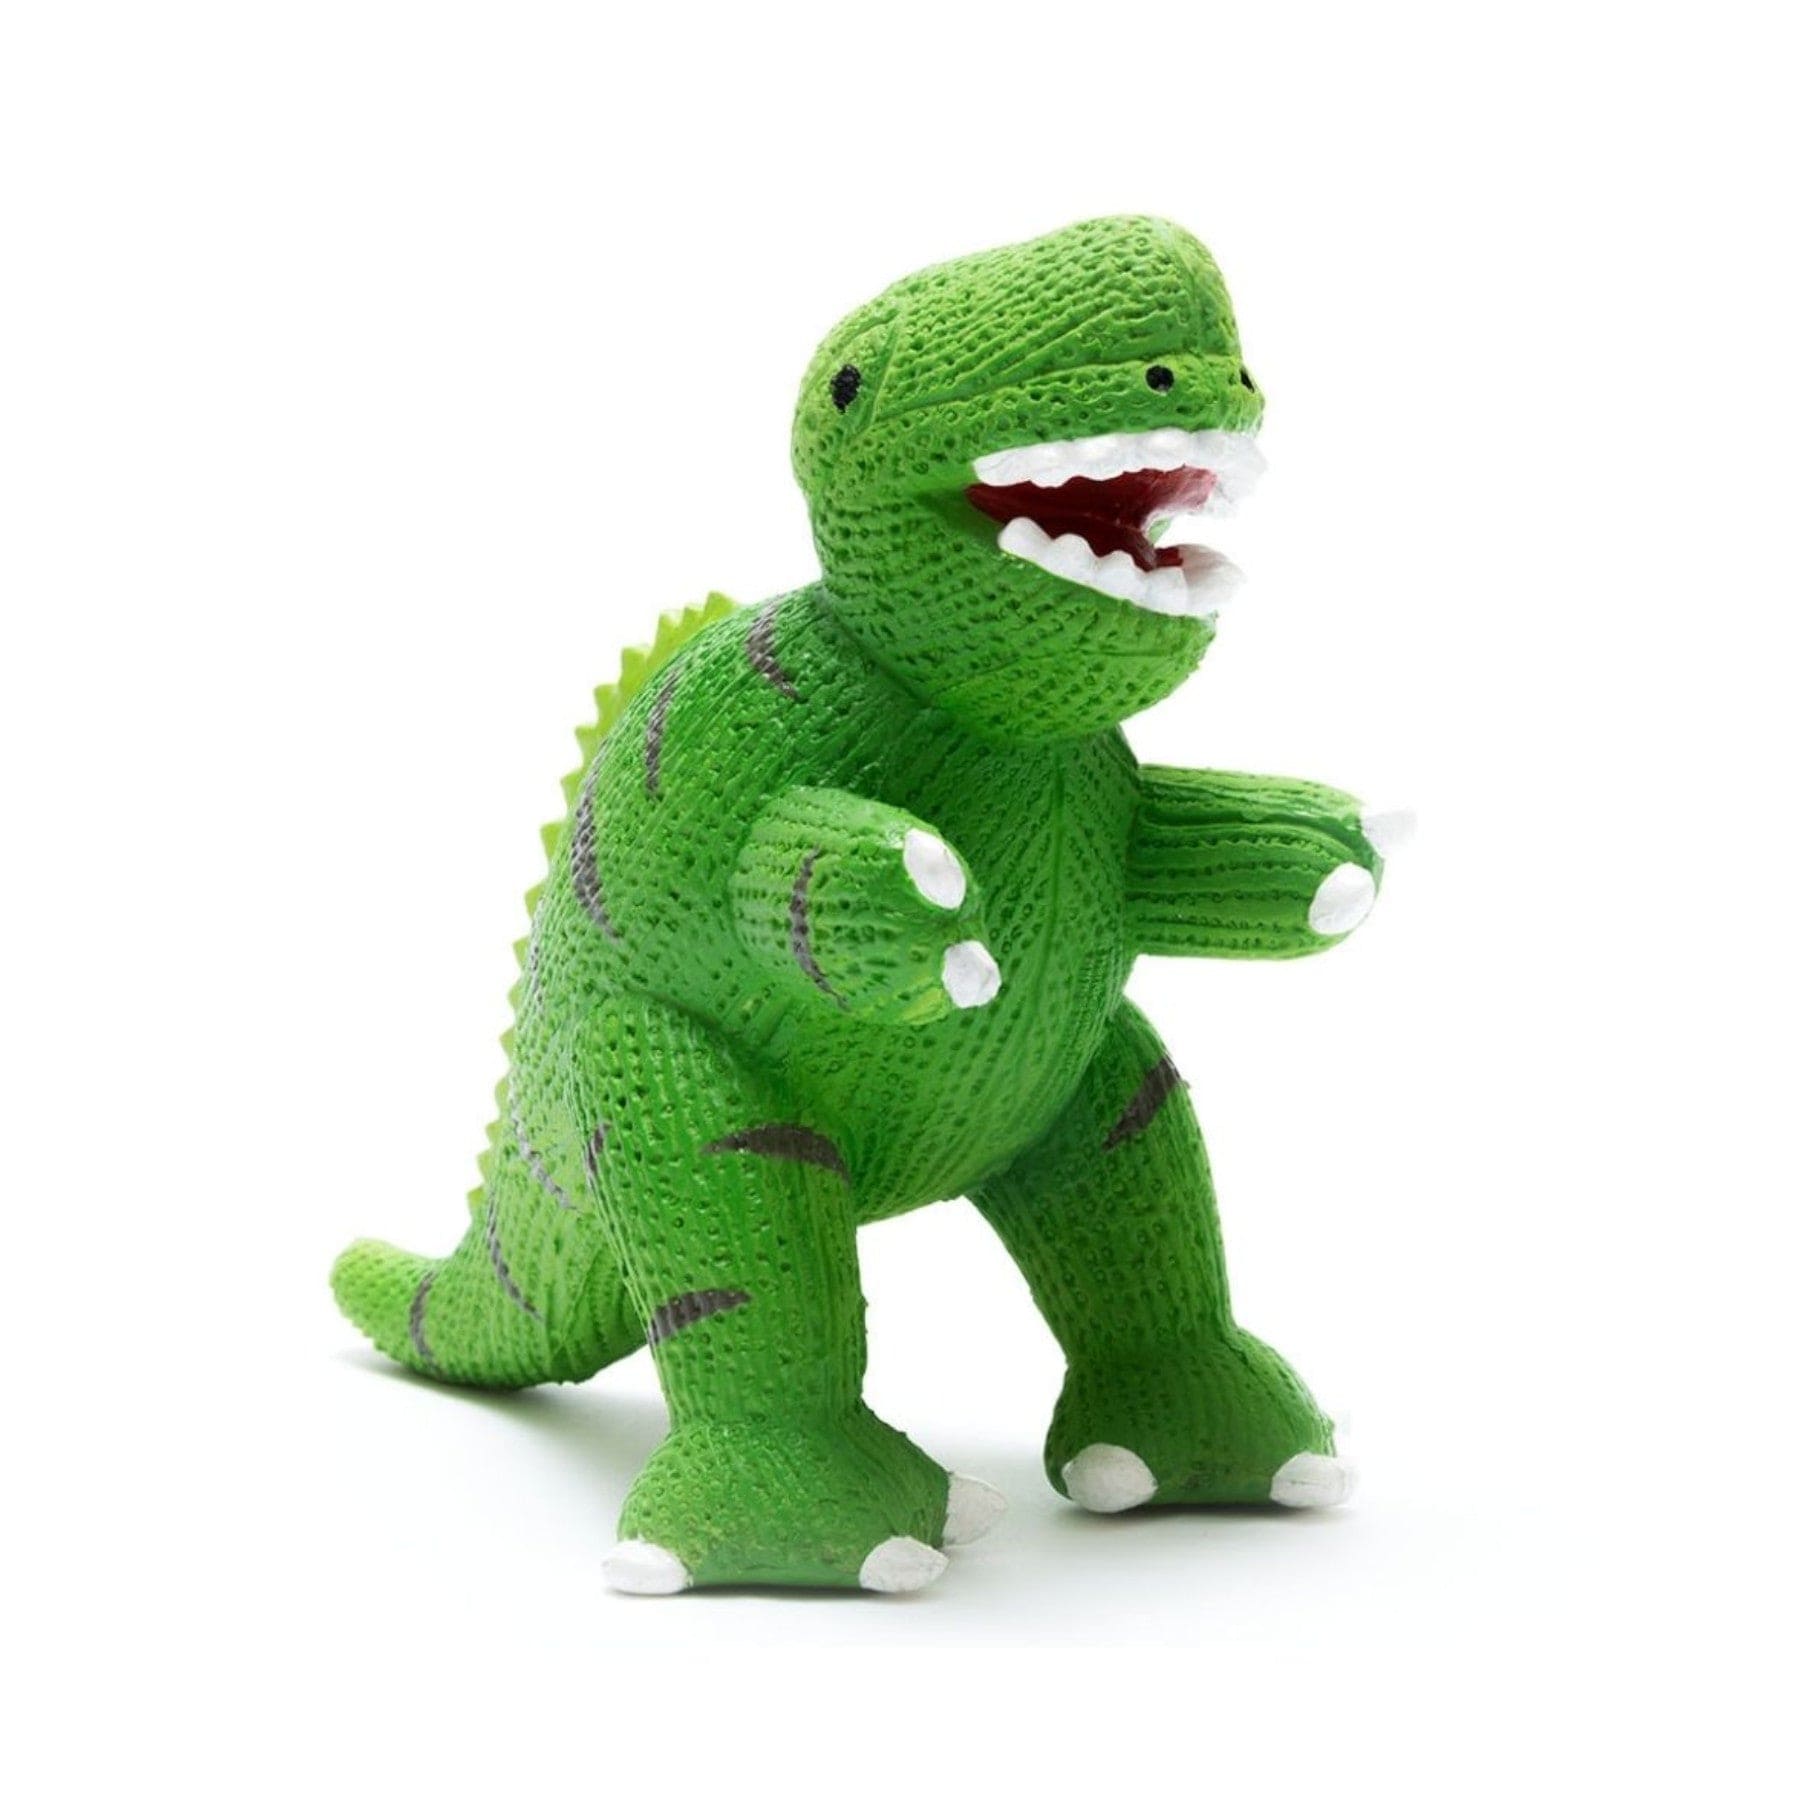 Green knitted dinosaur toy standing isolated on white background